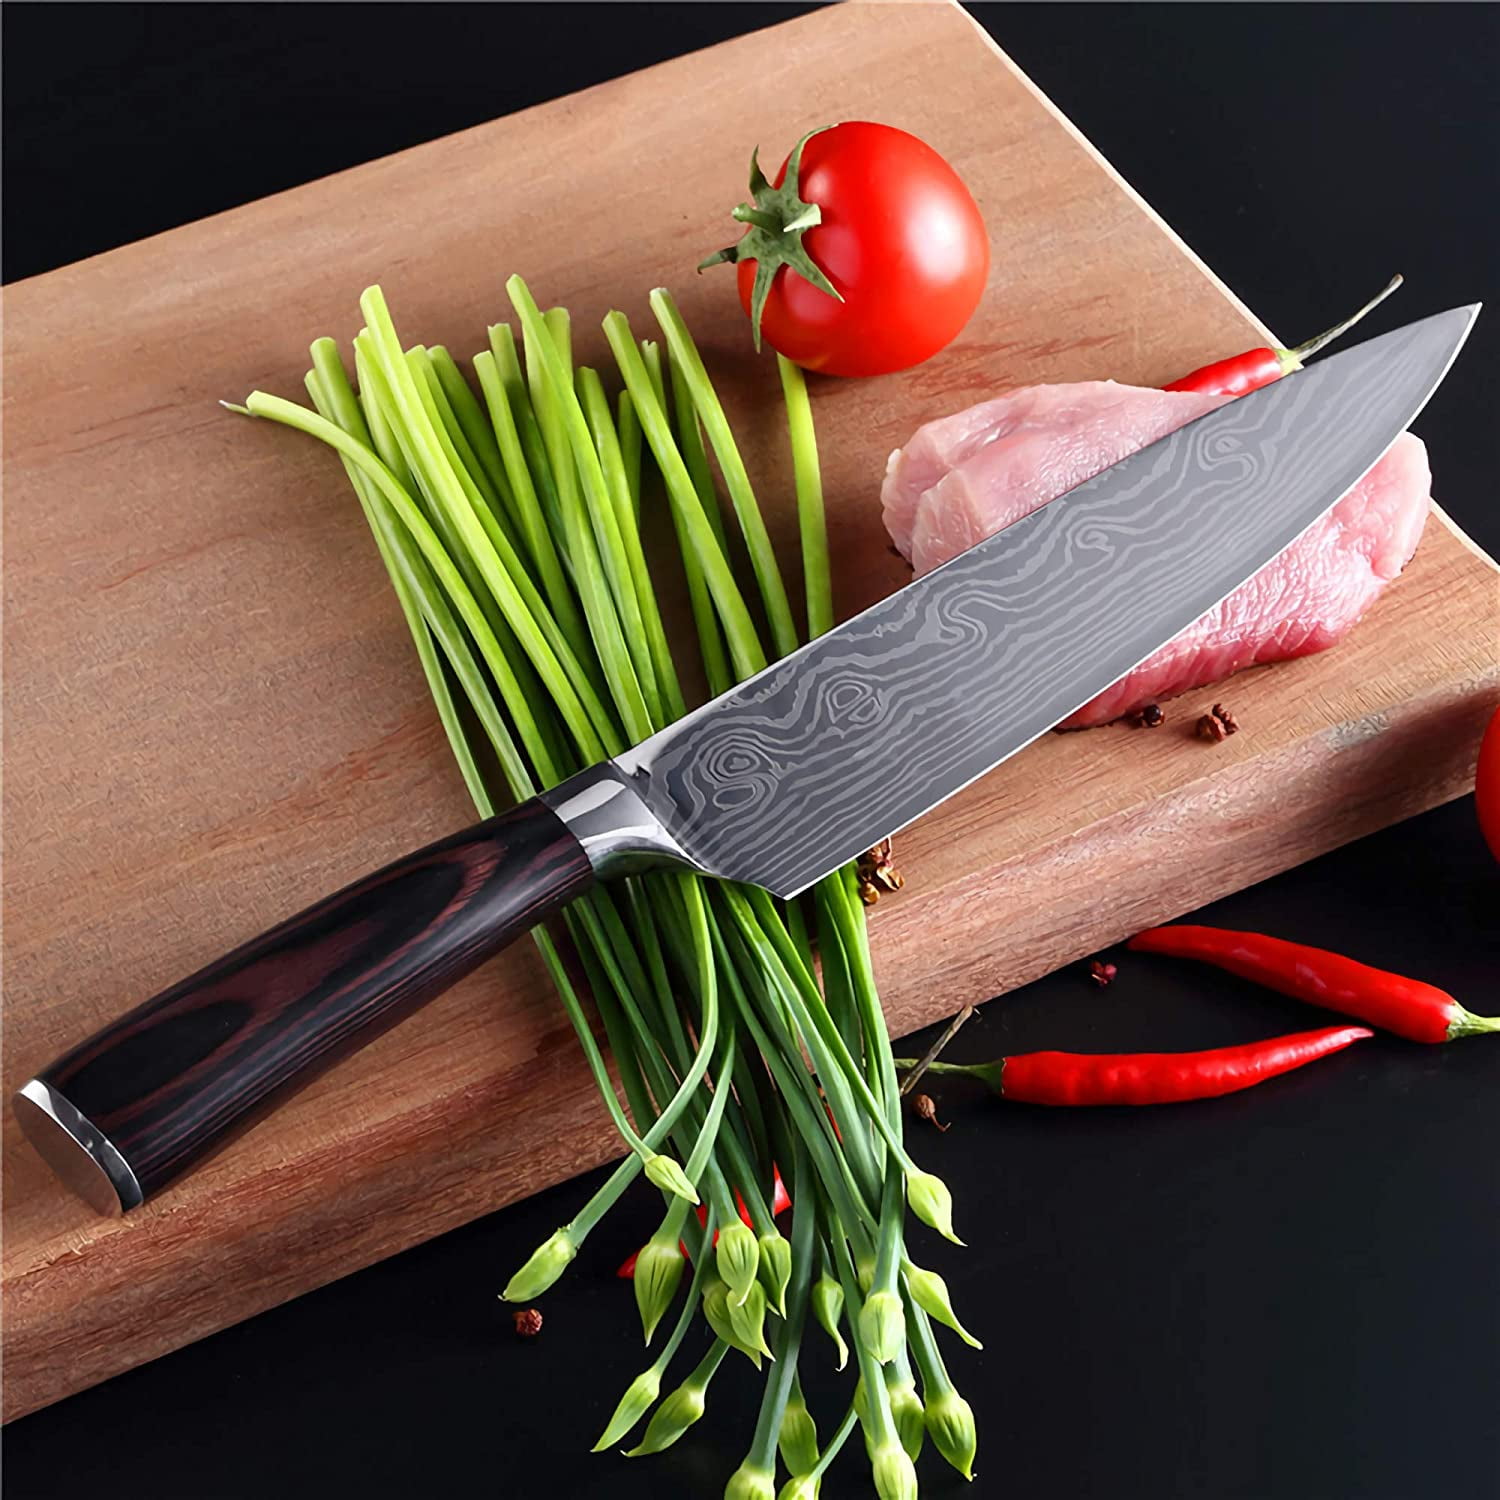 PICKWILL Chef Knife, 8 Inch Professional Kitchen Knives, High Carbon  Stainless Steel Ultra Sharp Kitchen Knife with Ergonomic ABS Handle, Gift  Box for